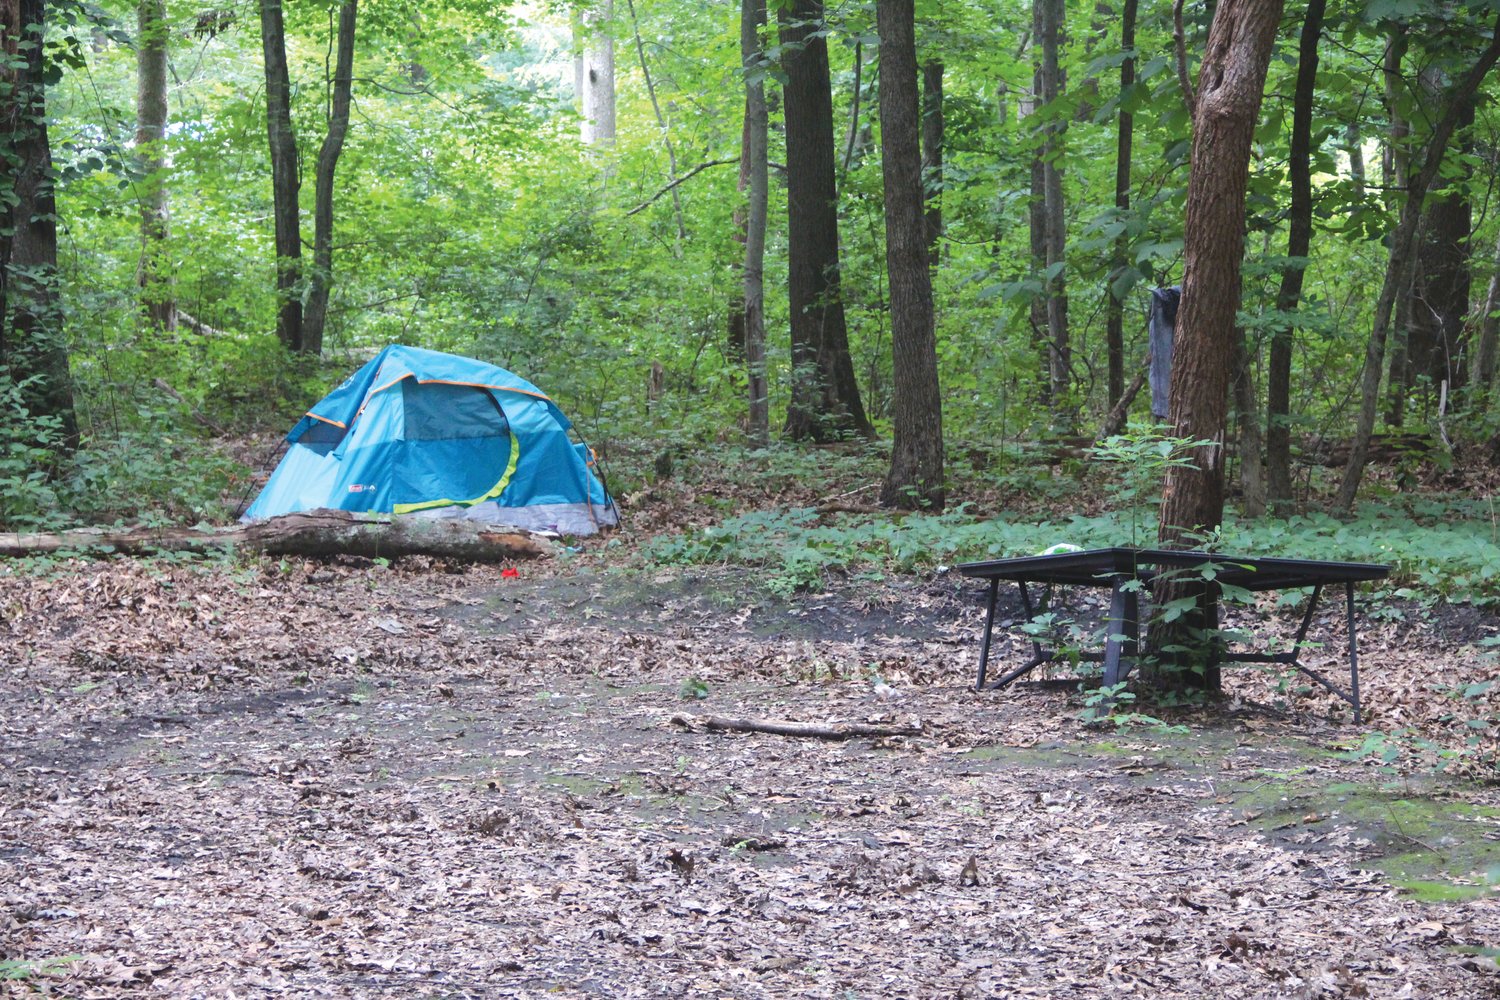 SUPER SIZED: This large tent was photographed in the wooded area off Meadow View last week. It was not there this Monday.